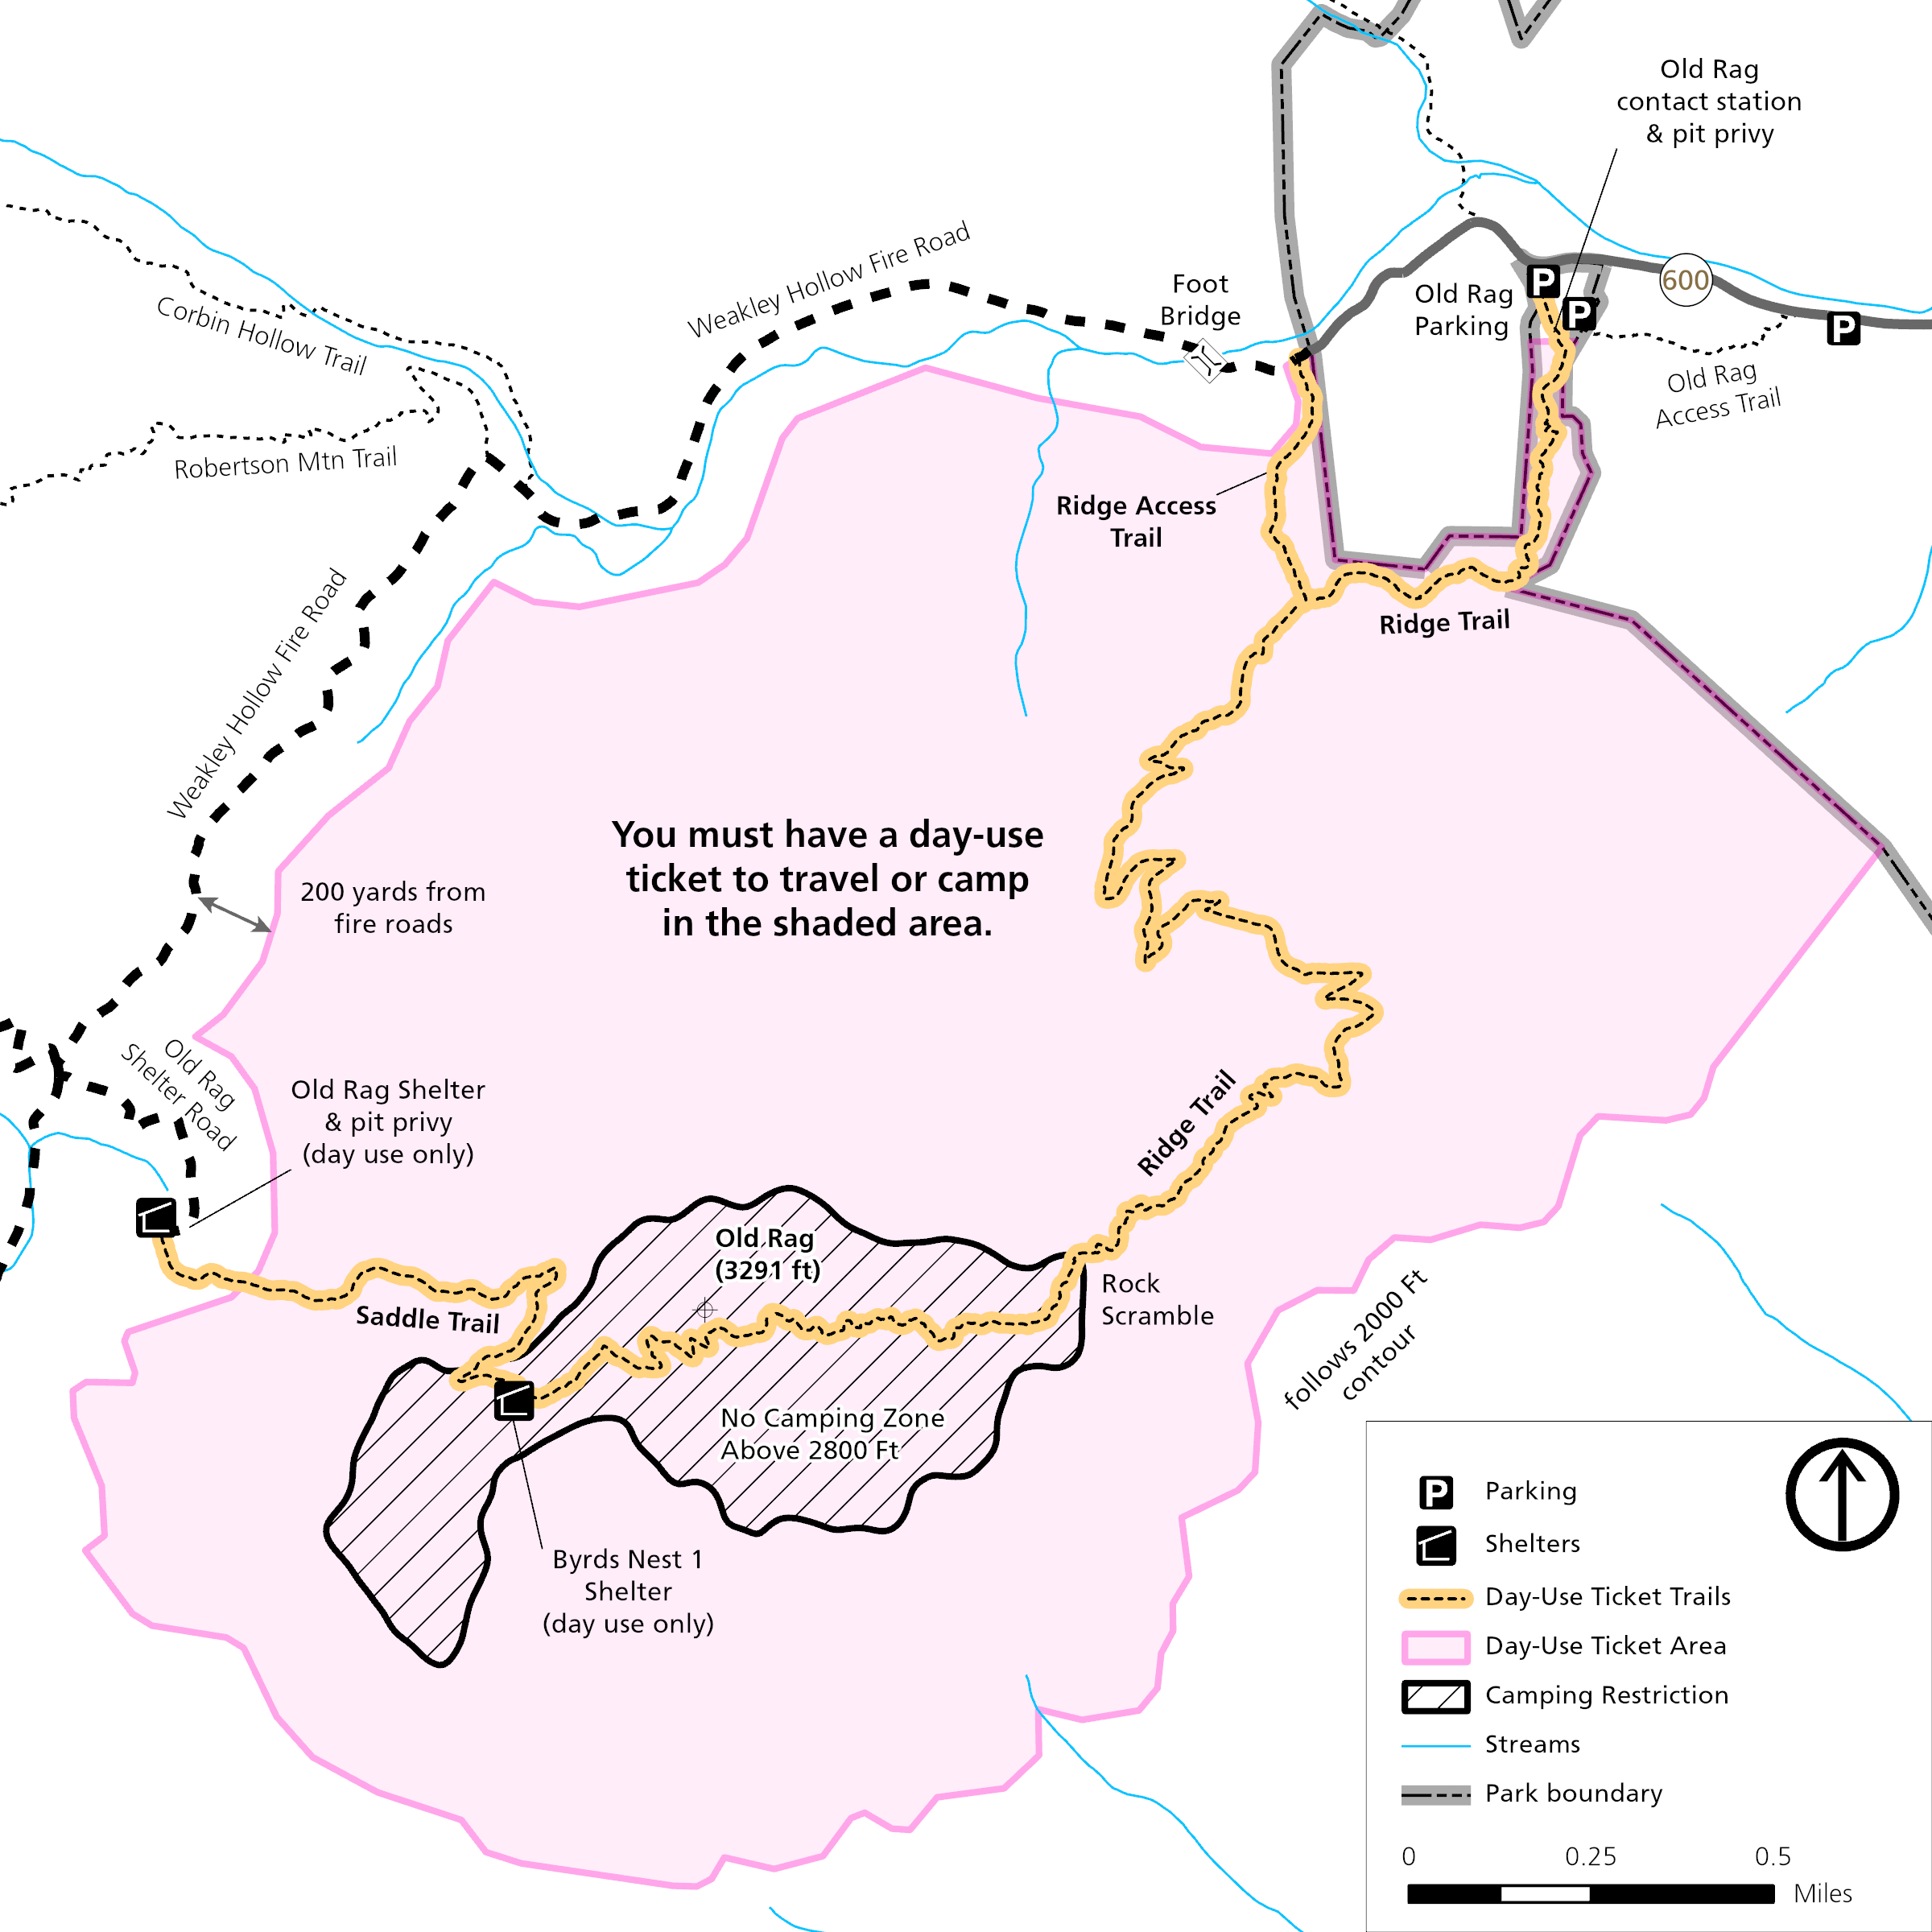 A map of the Old Rag area, showing a highlighted area that requires a day-use ticket.